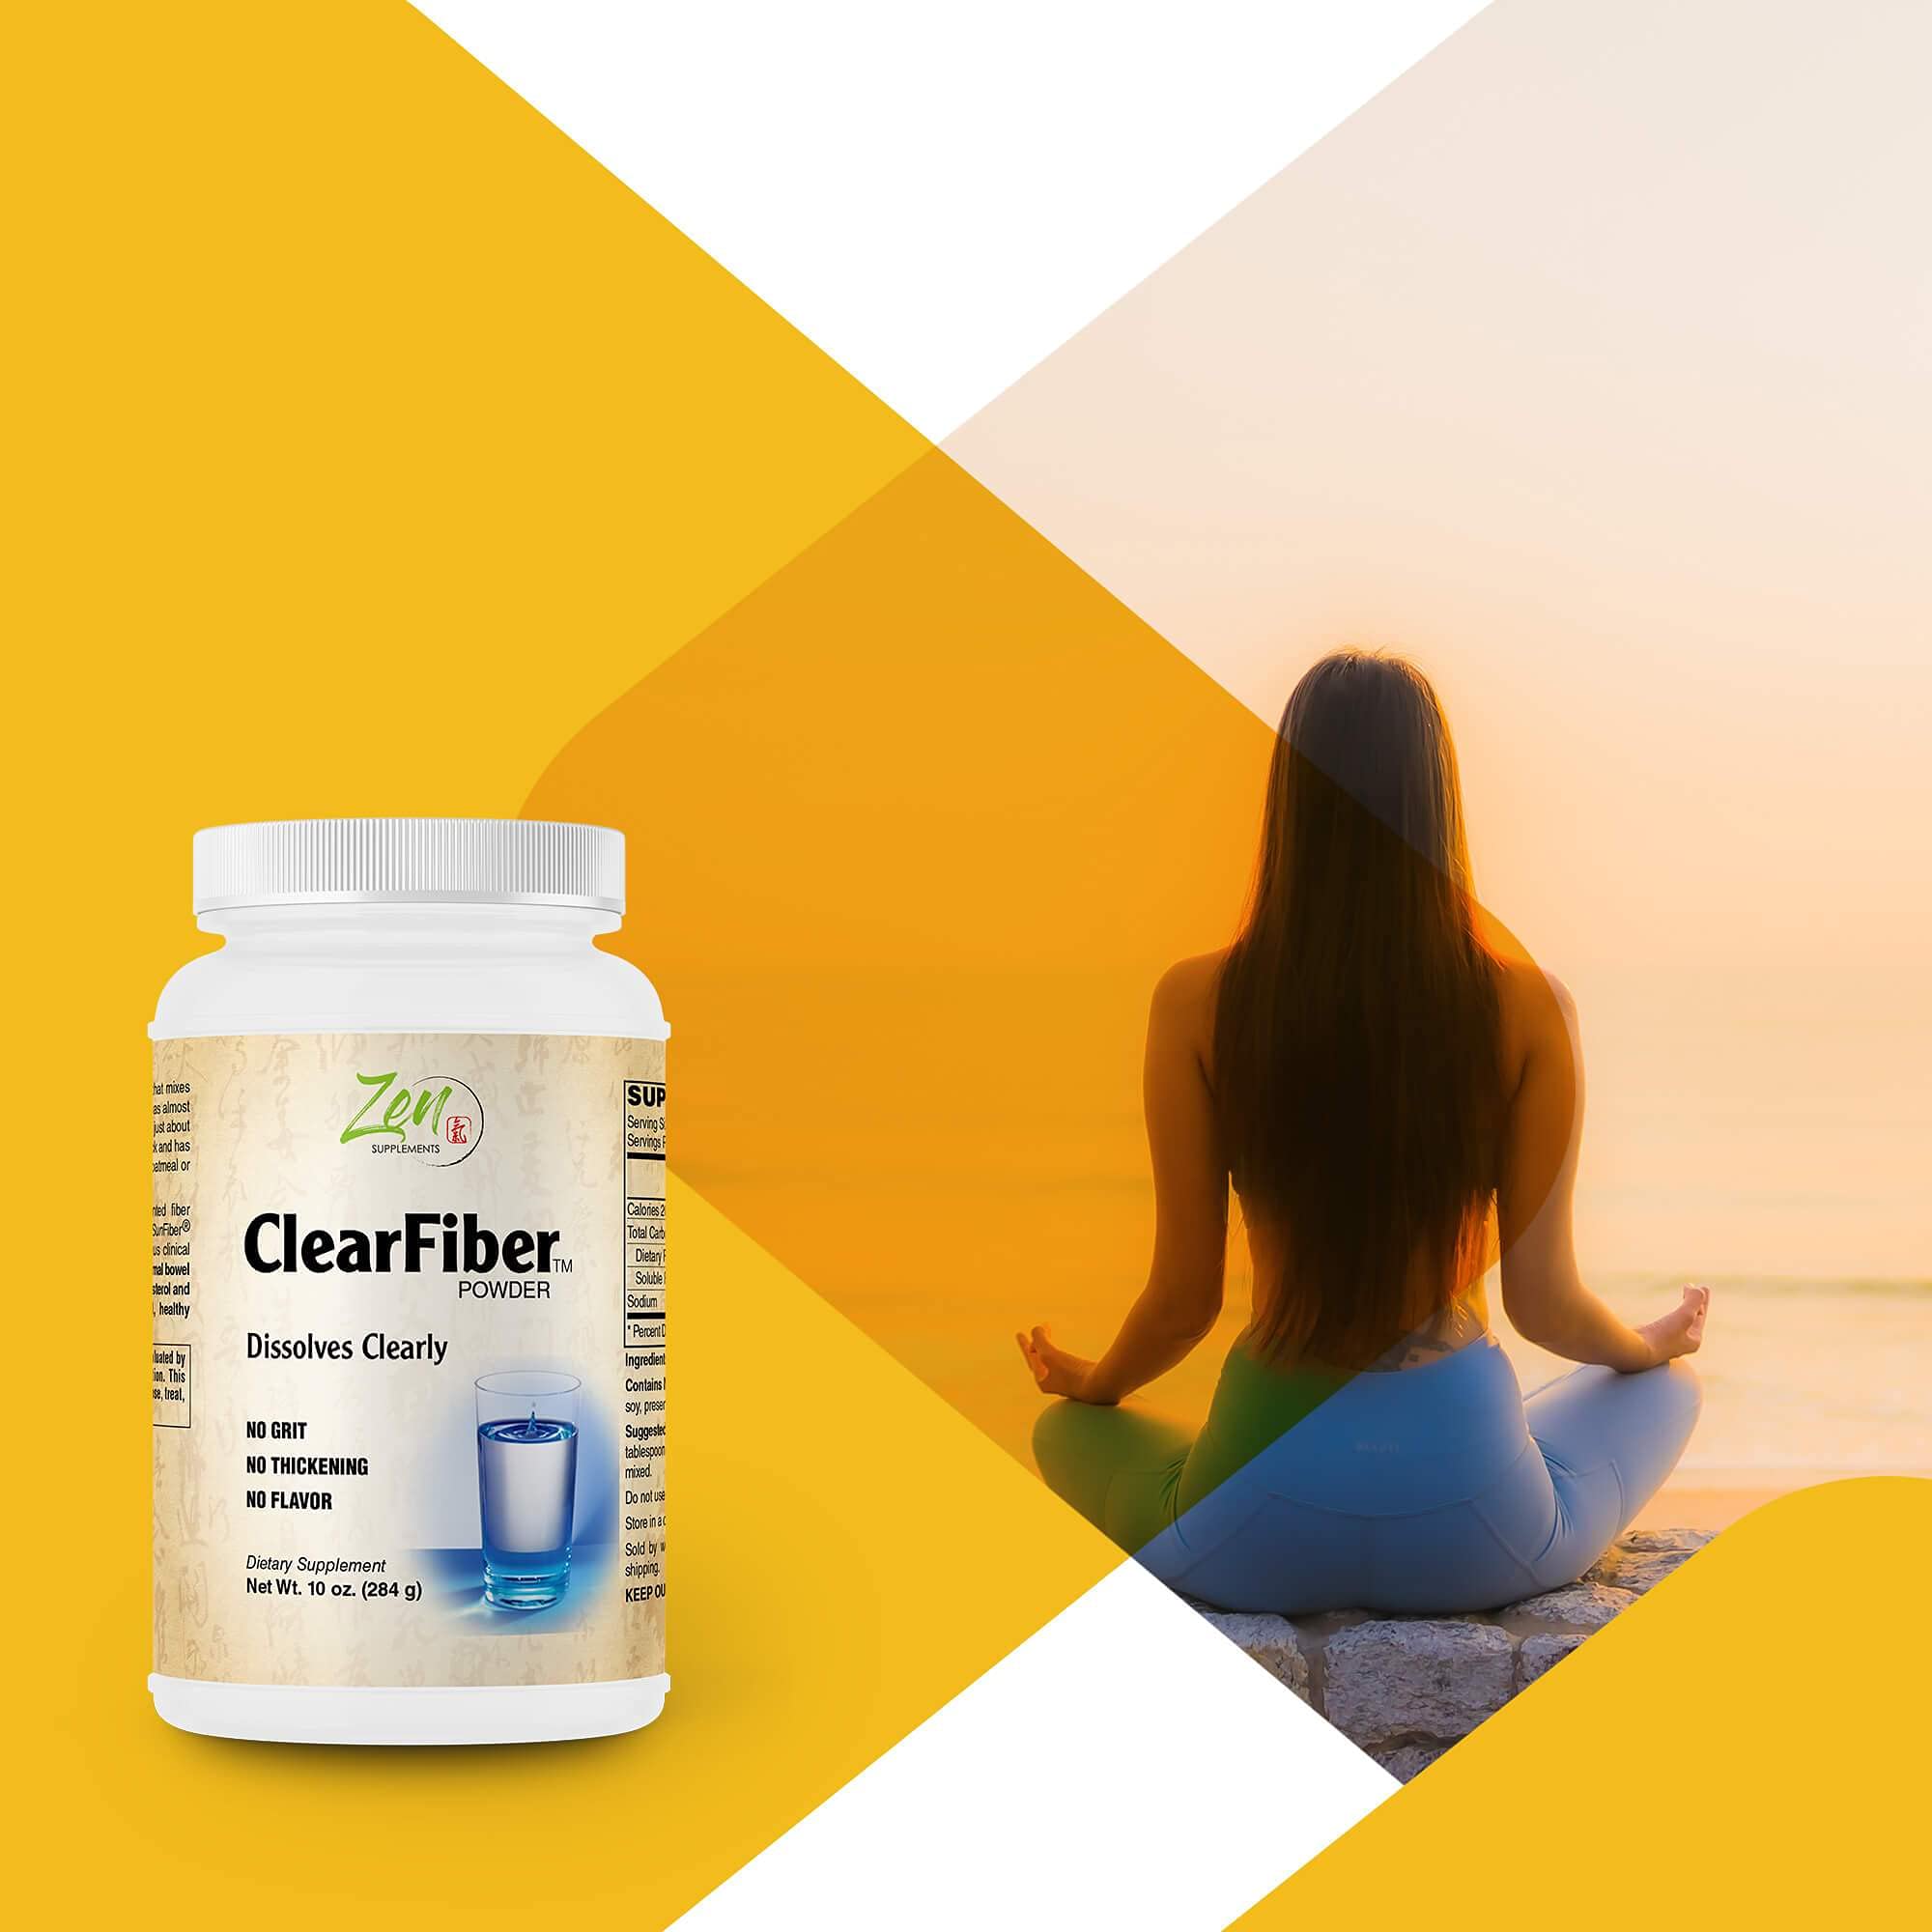 Zen Supplements - Clearfiber - Supports a Healthy Gut & Digestive Regularity, Feeds Good Bacteria, Ease Gas & a Complement for Probiotics 10 Oz-Powder